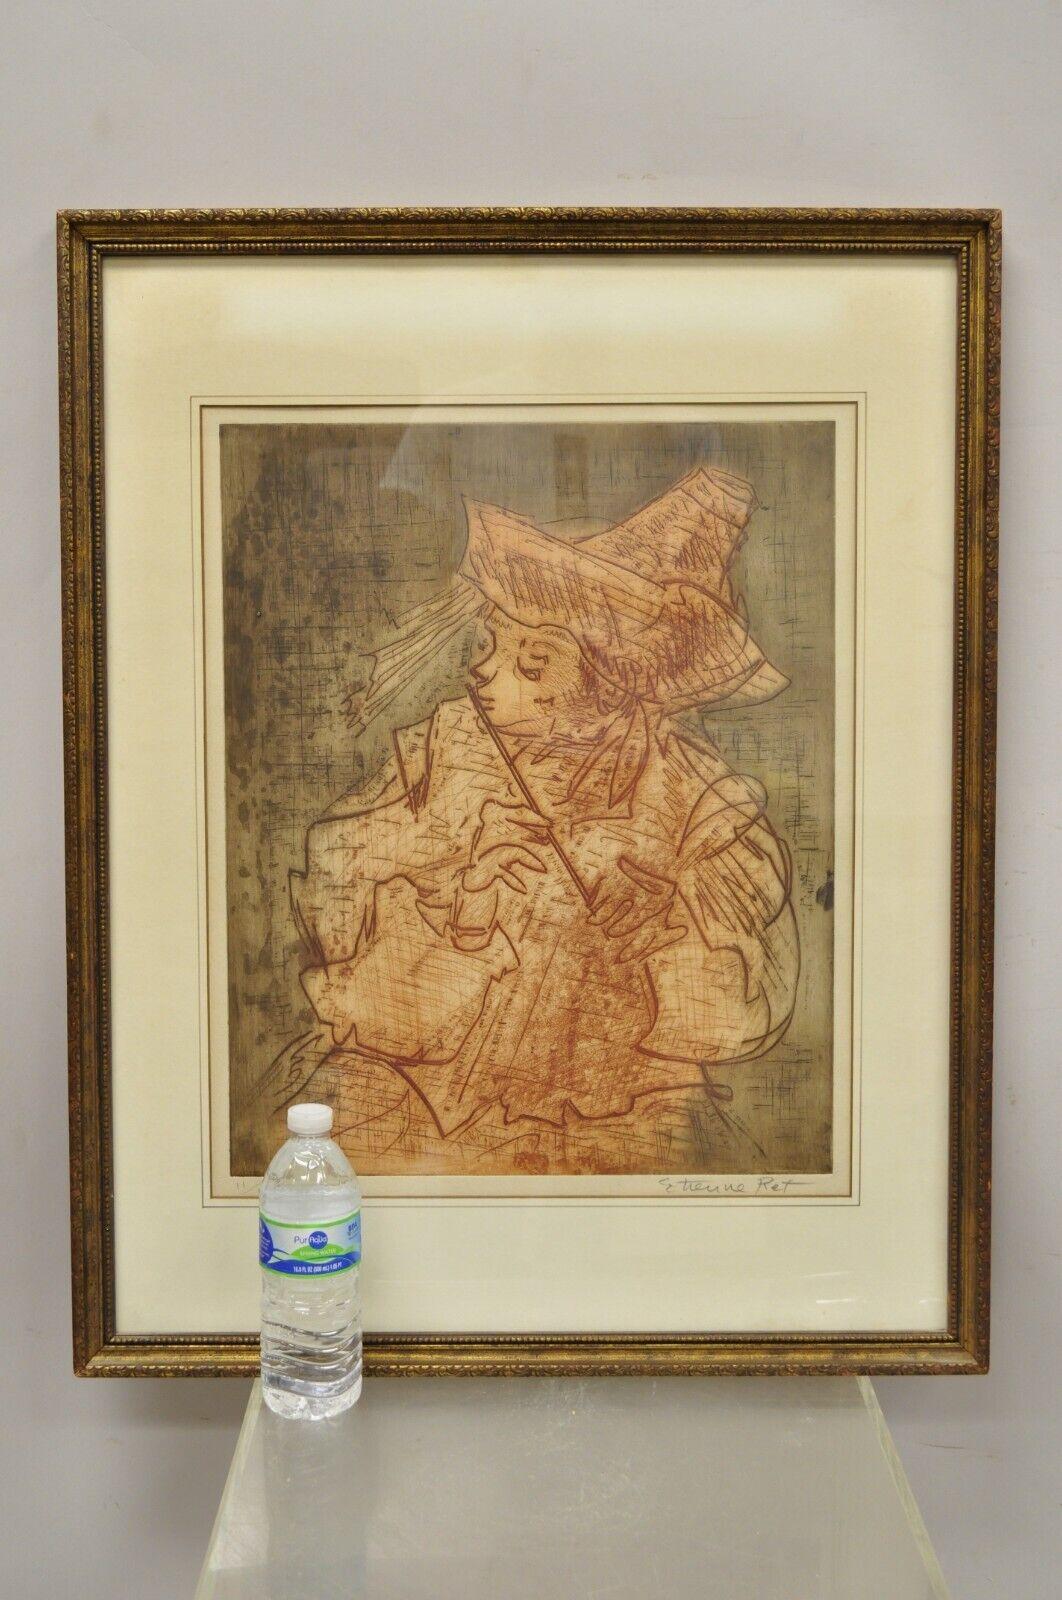 Etienne ret signed and numbered color etching fine art print musician with Piccolo Flute. Item listed is signed to bottom right corner, Etienne Ret (French, 1900-1996), Numbered 11/100, J. Richards Gallery, custom framed. Circa mid-20th century.